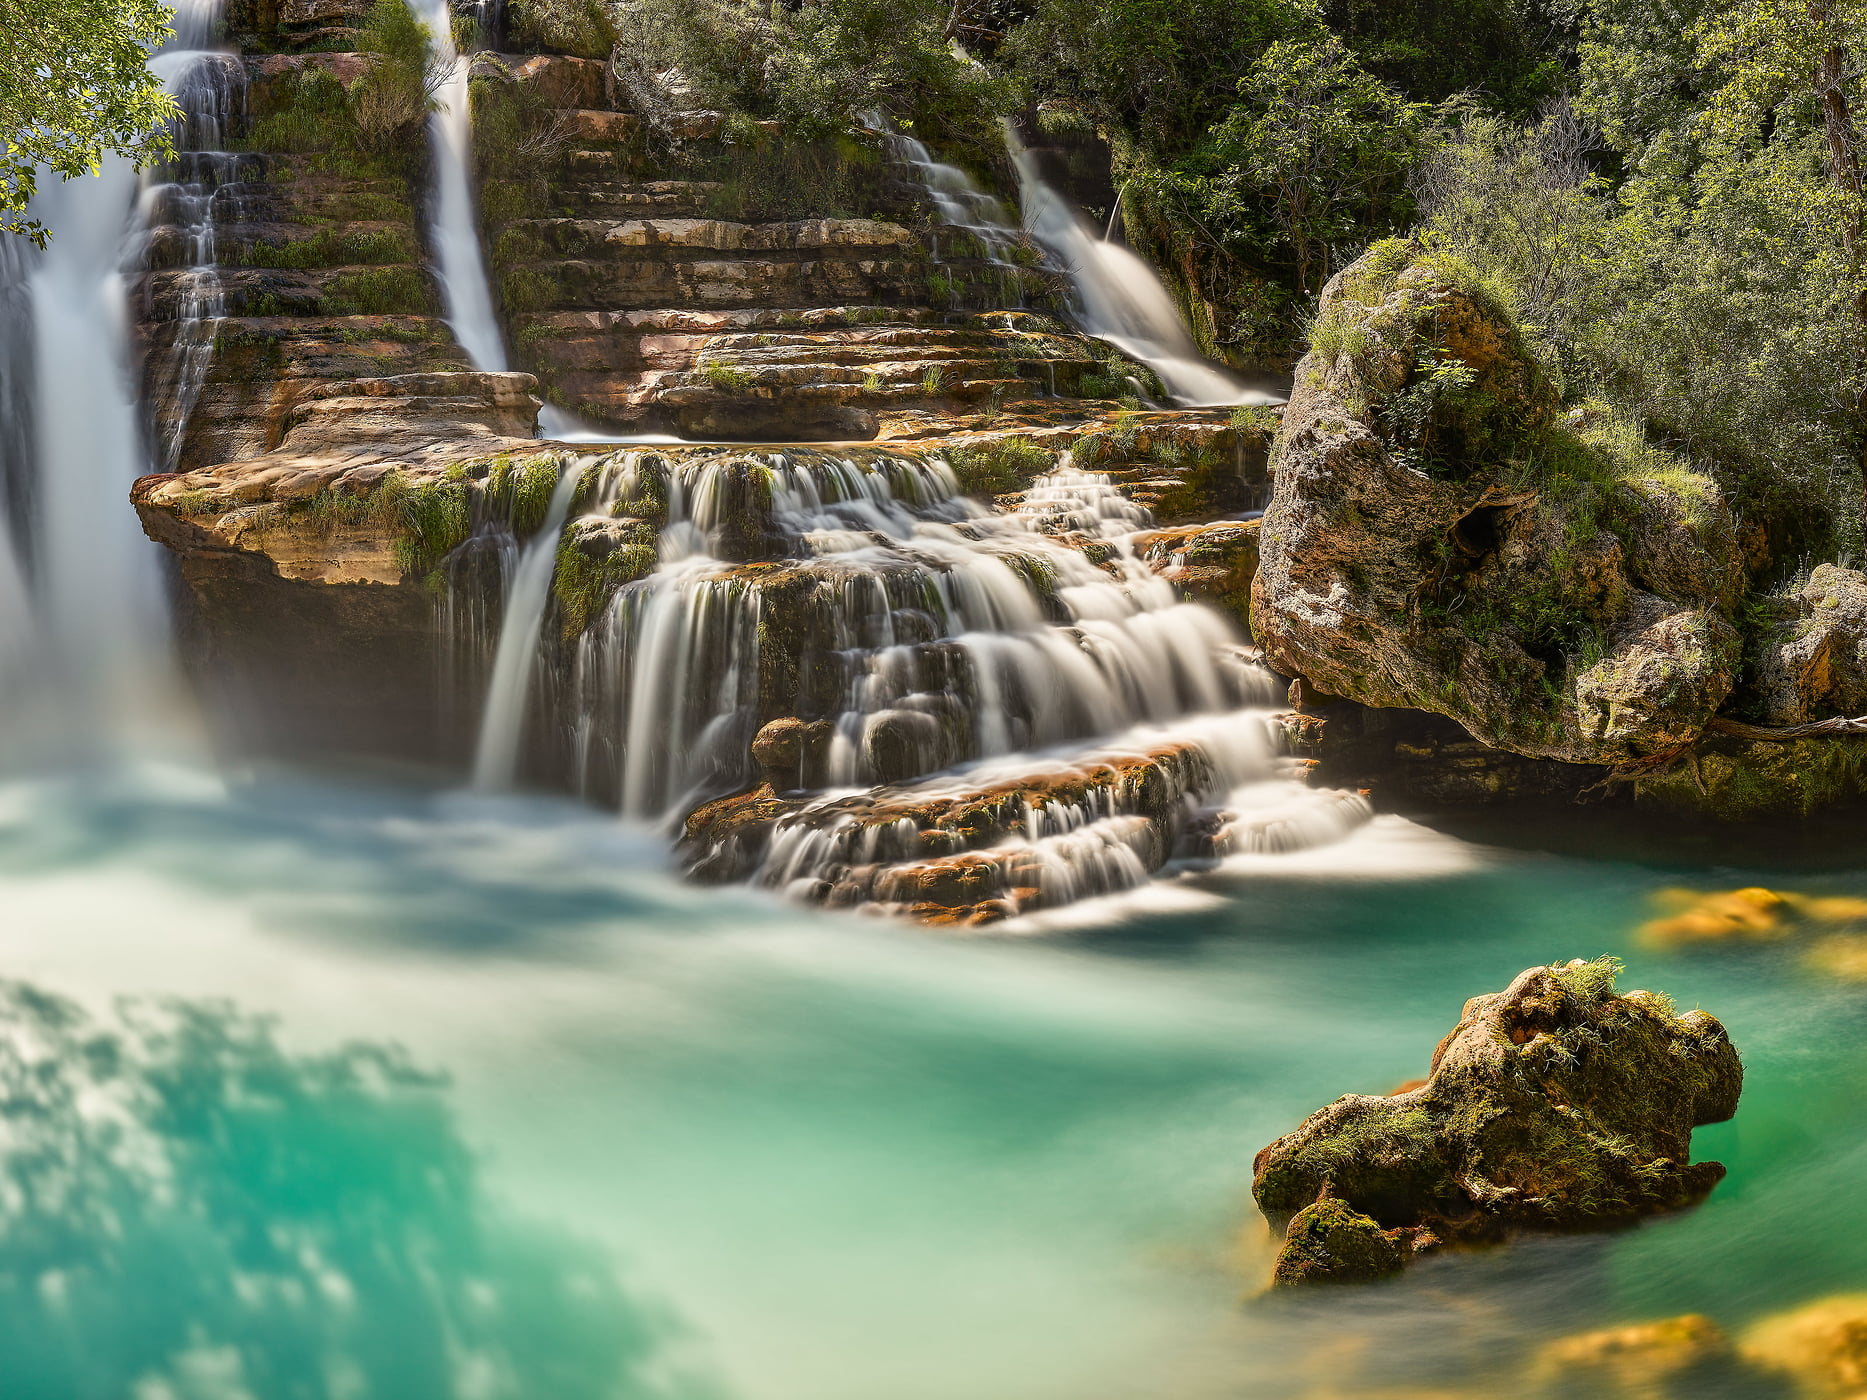 181 megapixels! A very high resolution, large-format VAST photo print of a waterfall and rocks; nature photograph created by David Meaux in Cascade de Navacelles, Navacelles, l'Hérault, France.